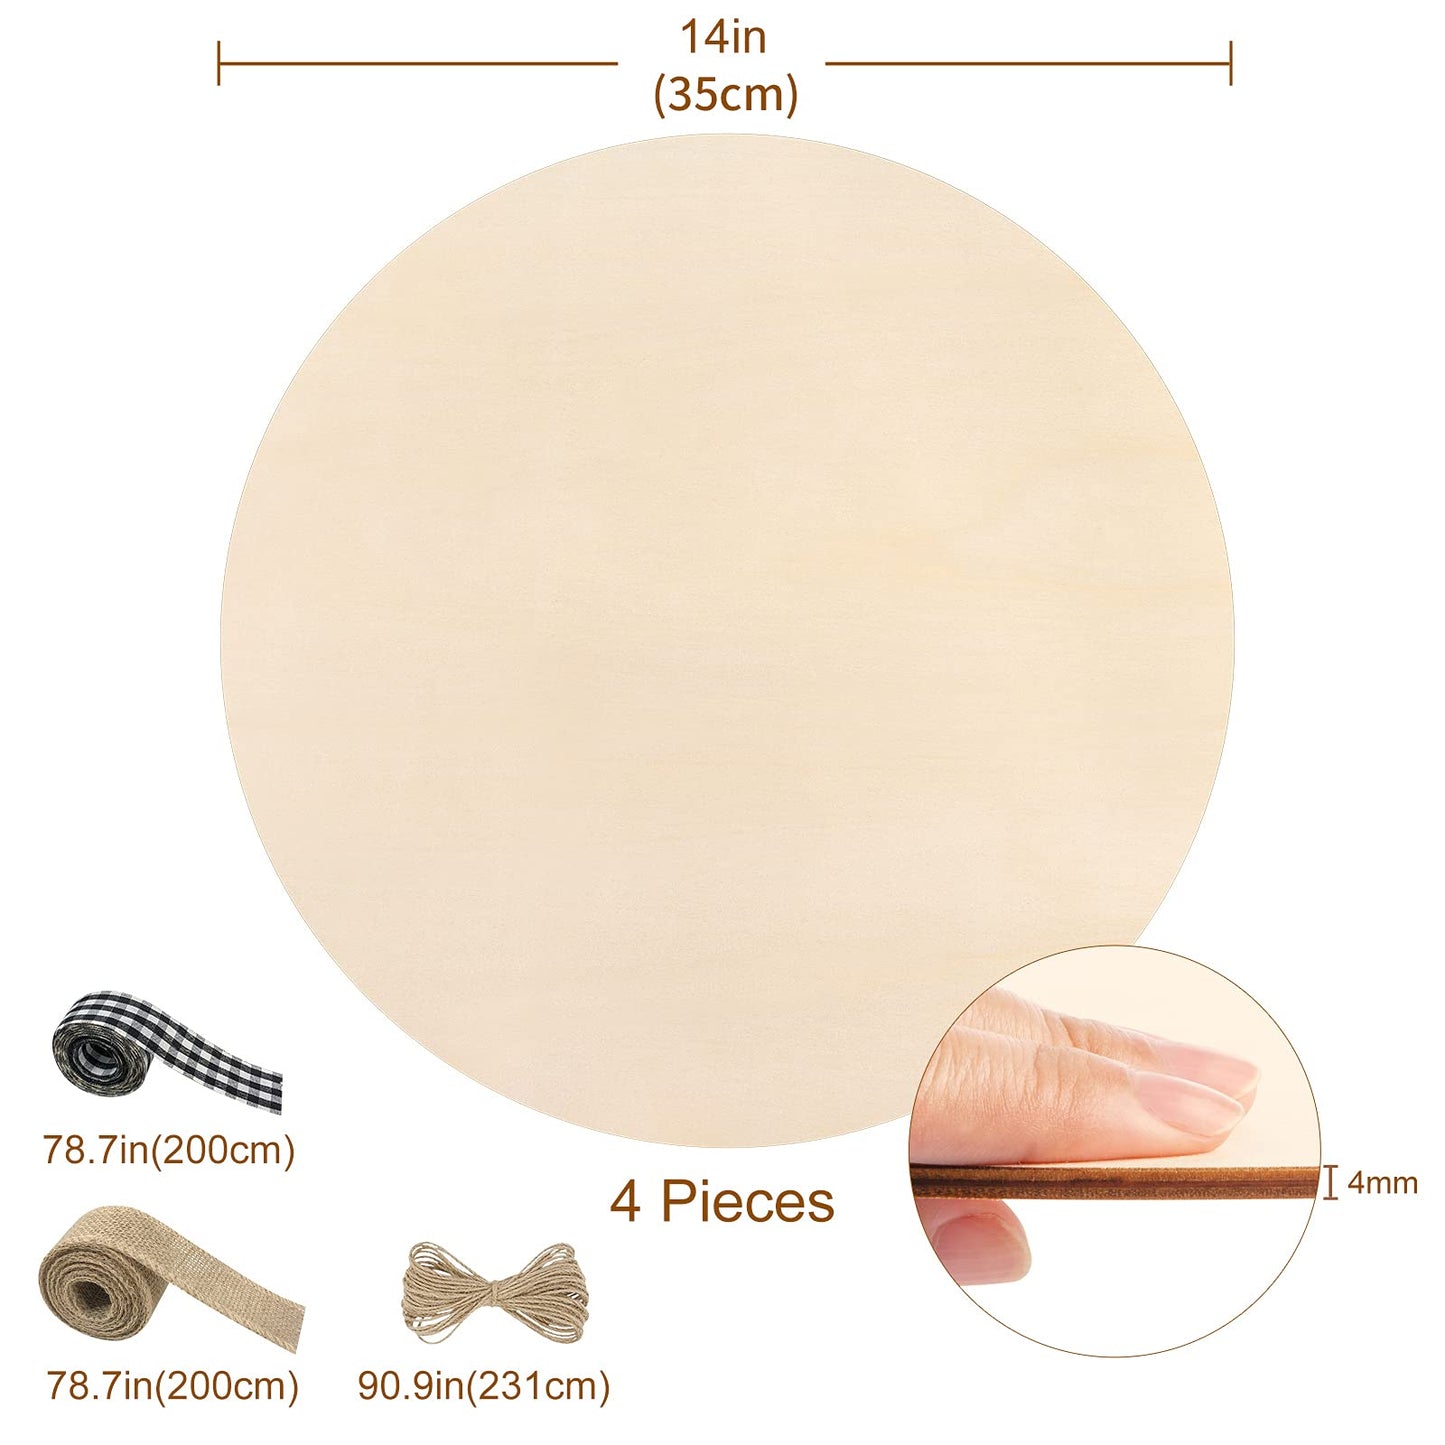 Fuyit Unfinished Wood Circles, 4Pcs 14 Inch Uniform Blank Wood Rounds Slice Wooden Cutouts with Ribbon & Twine for DIY Crafts, Door Hanger, Sign,